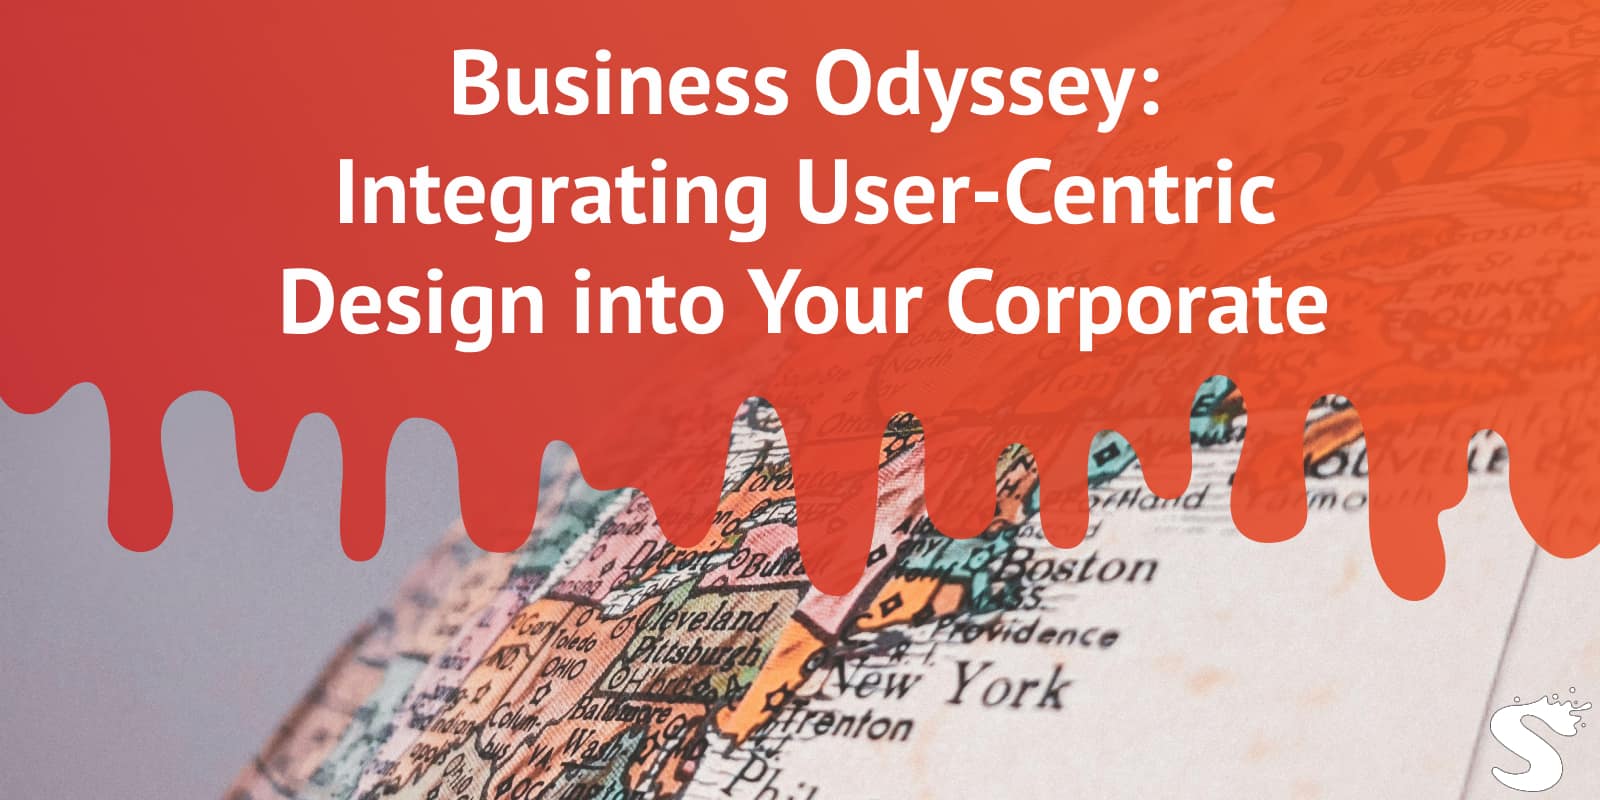 Business Odyssey: Integrating User-Centric Design into Your Corporate Travel Site